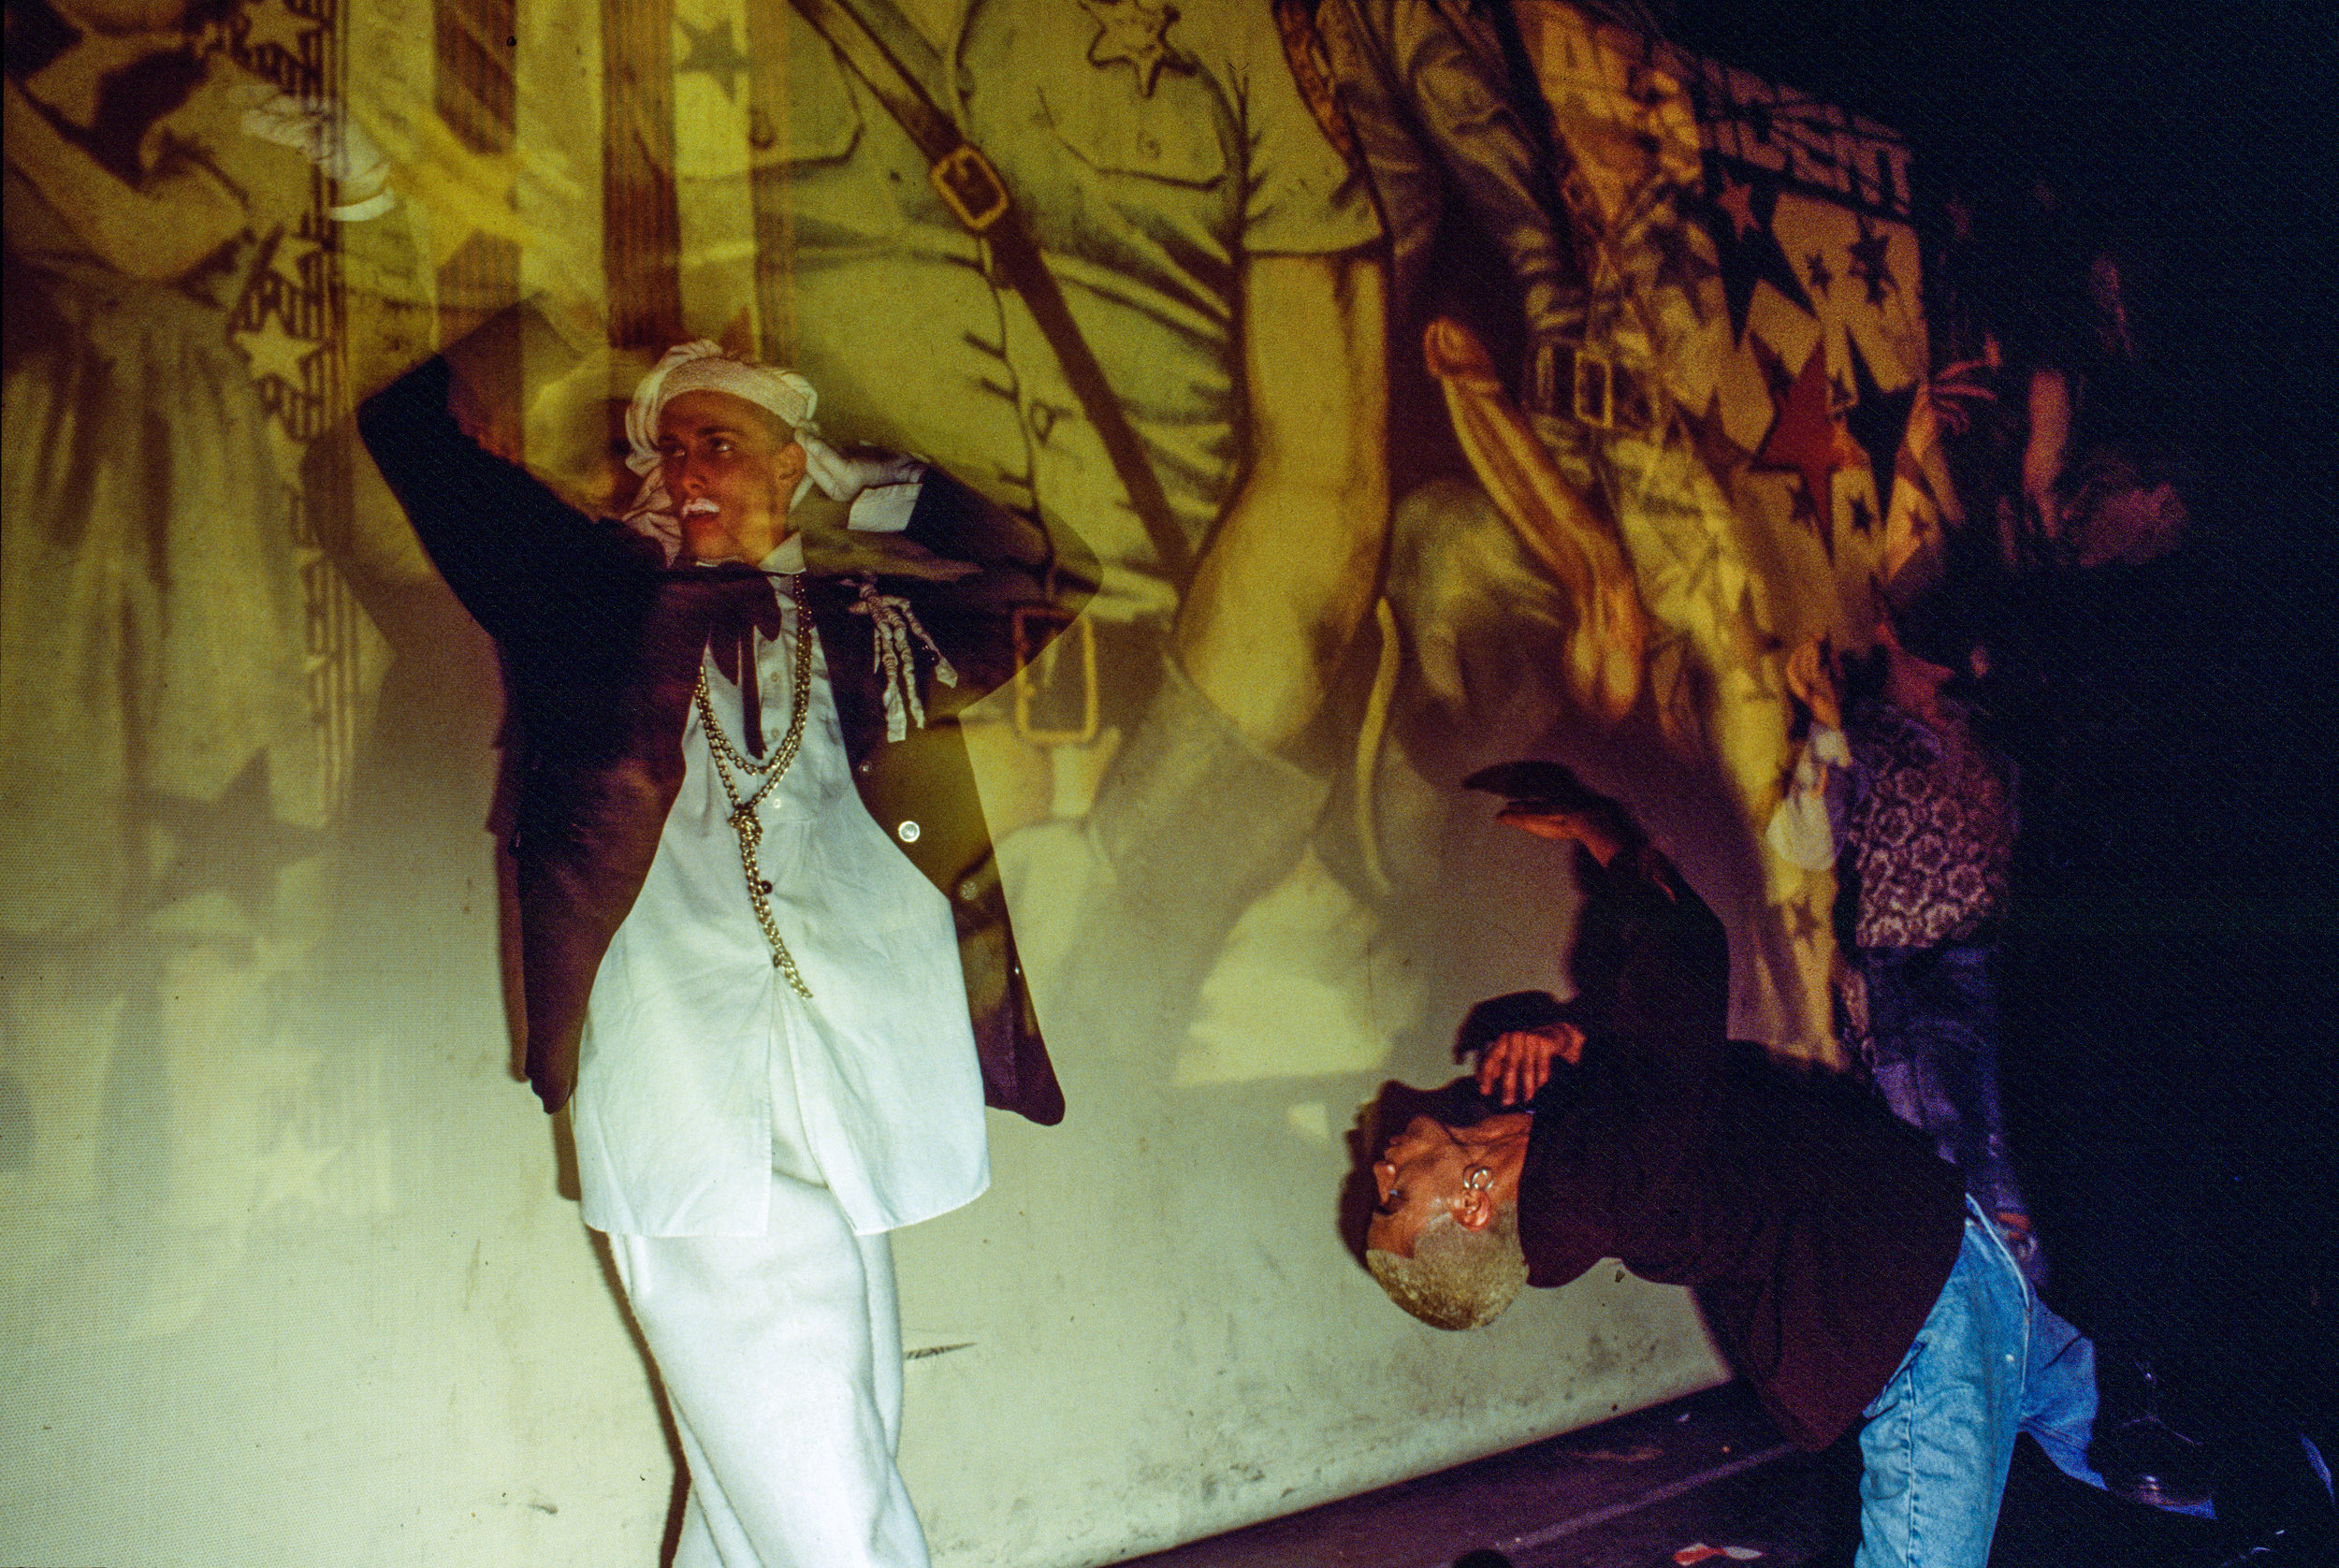 Voguing and at nightclub in Brixton, 1989